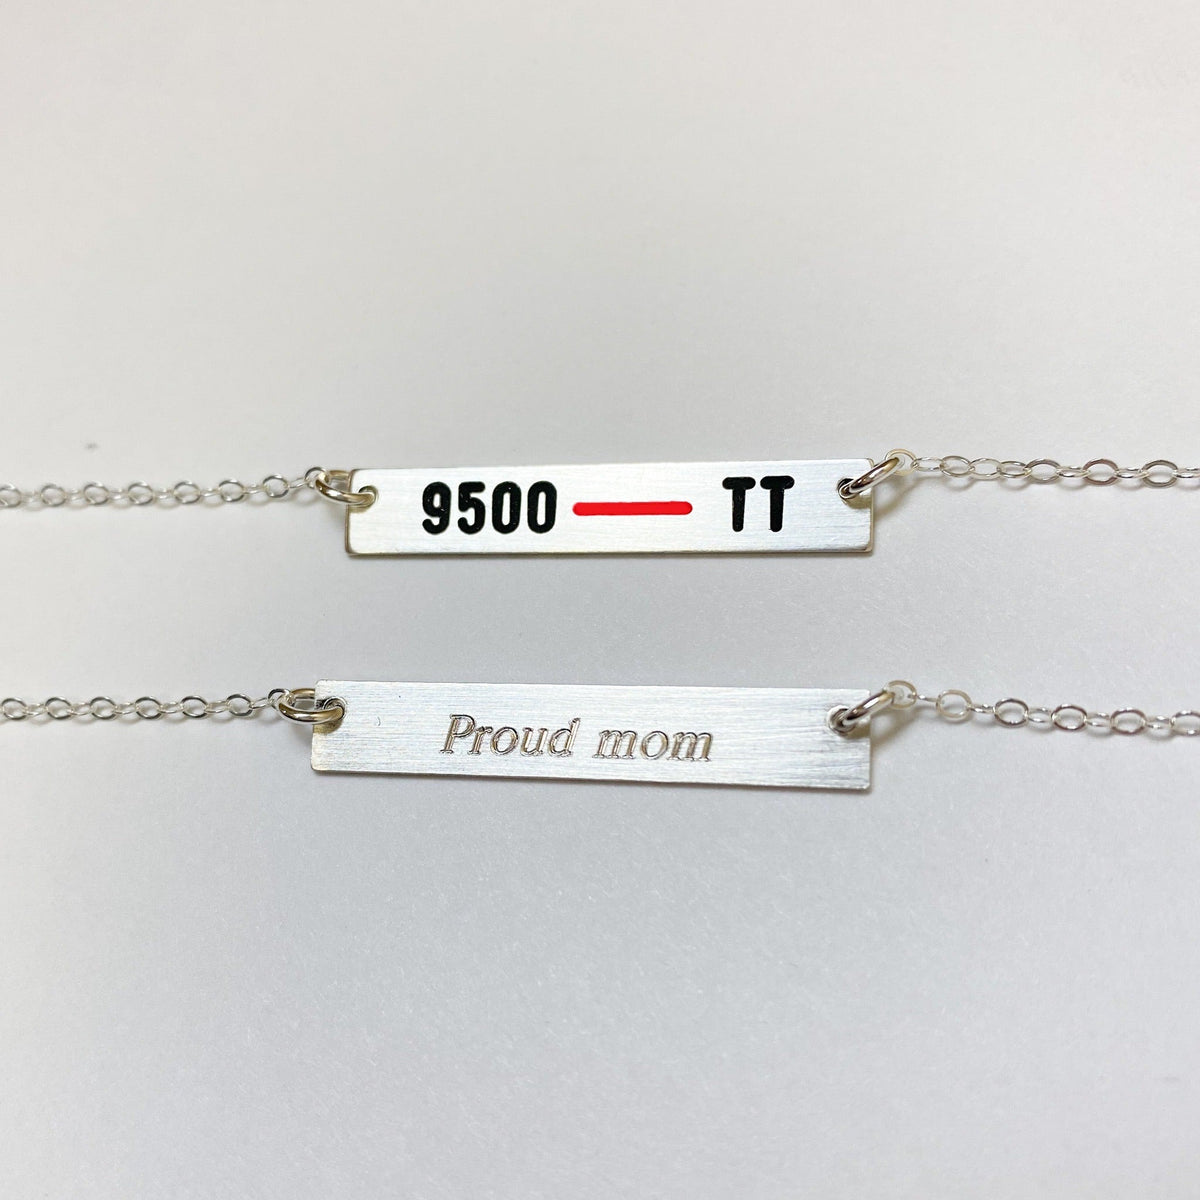 Thin Red Line Necklace with 2 Badge Numbers